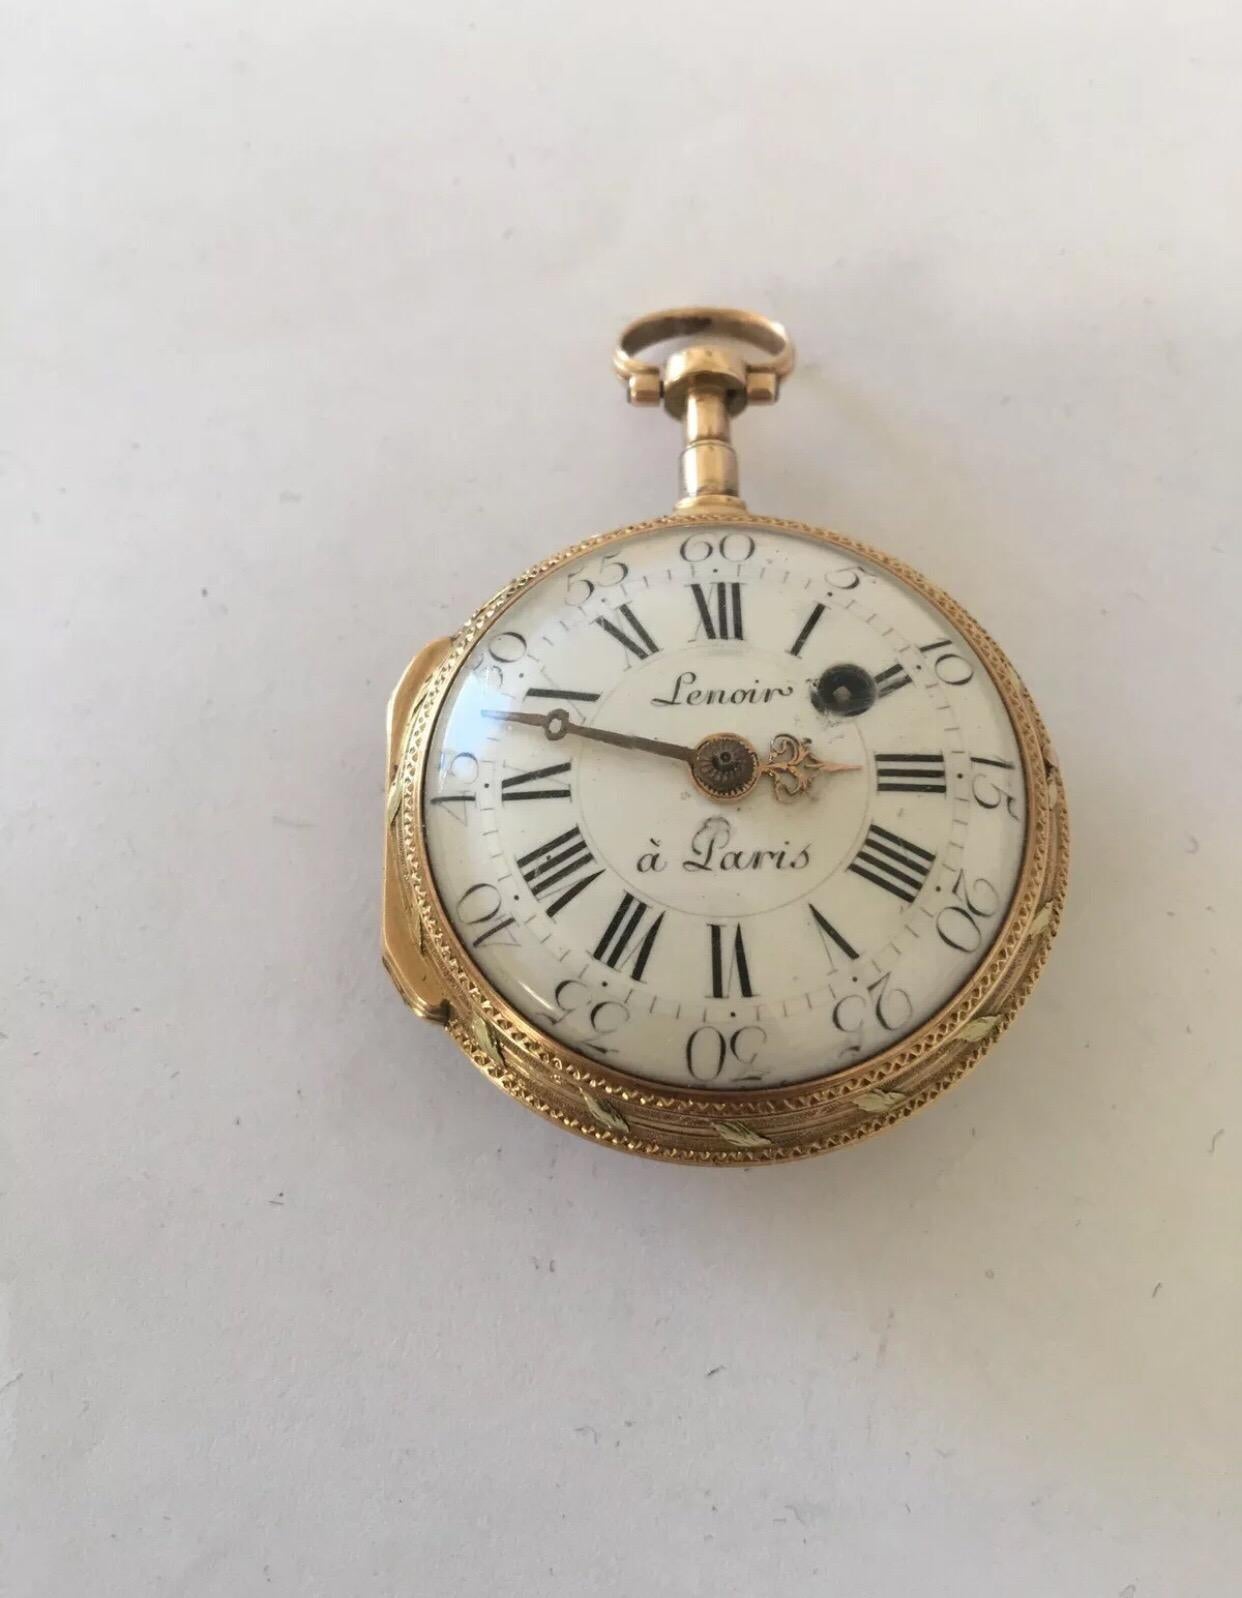 
This stunning and rare early verge Fusee Paris 40mm diameter (excluding crown) pocket watch is in good working condition but I cannot guarantee the time accuracy due to its age. Visible signs of ageing and wear with some surface marks on the